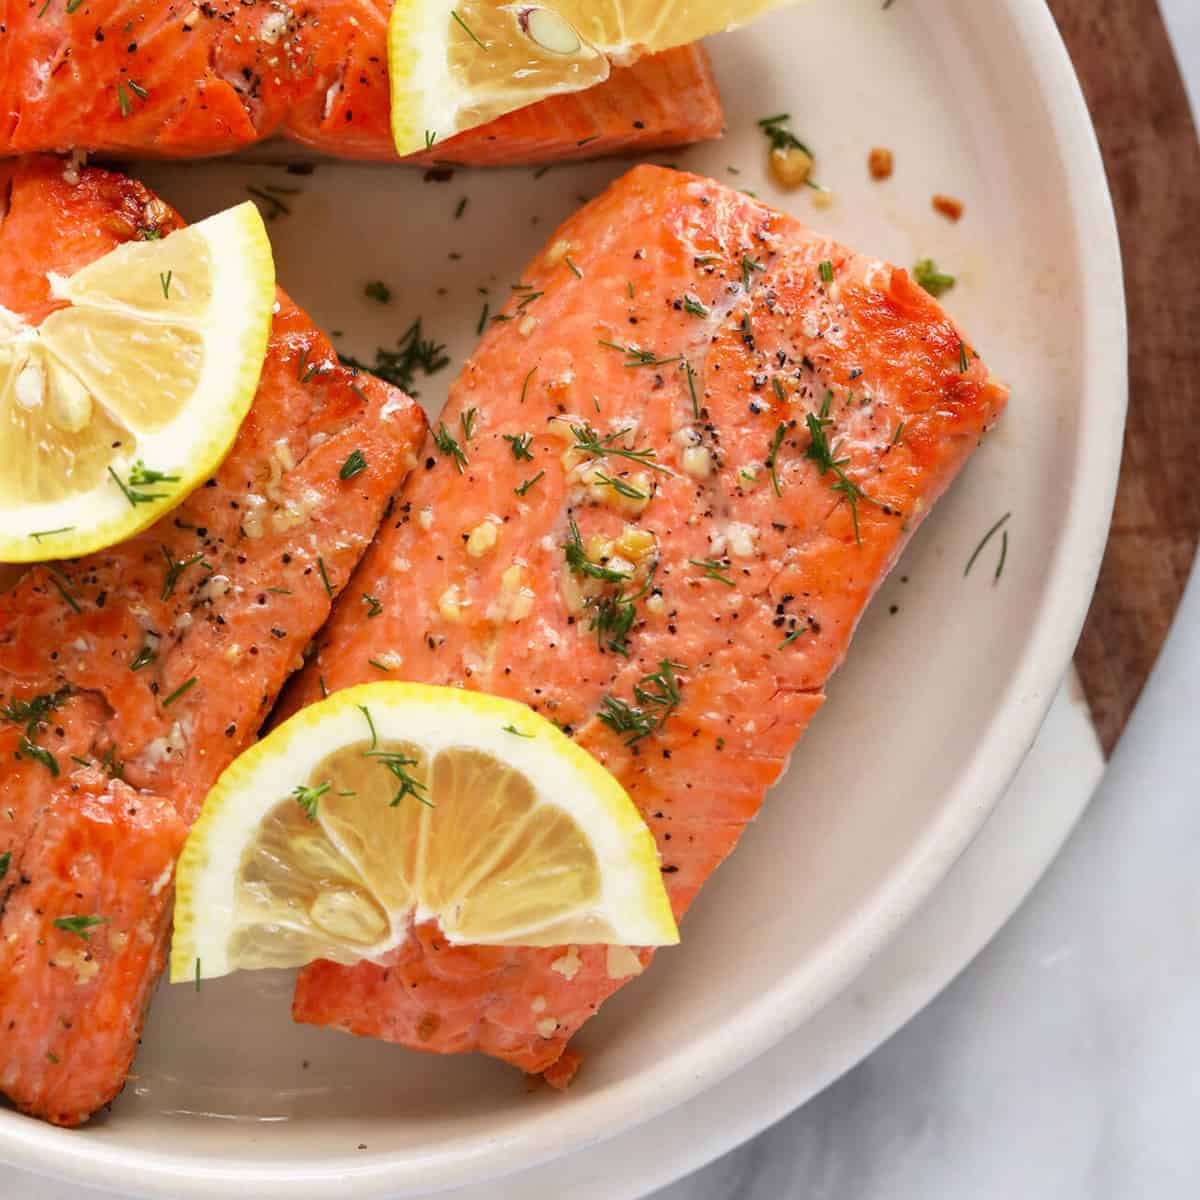 https://fitfoodiefinds.com/wp-content/uploads/2019/06/pan-seared-salmon-2-1365x2048-1.jpg